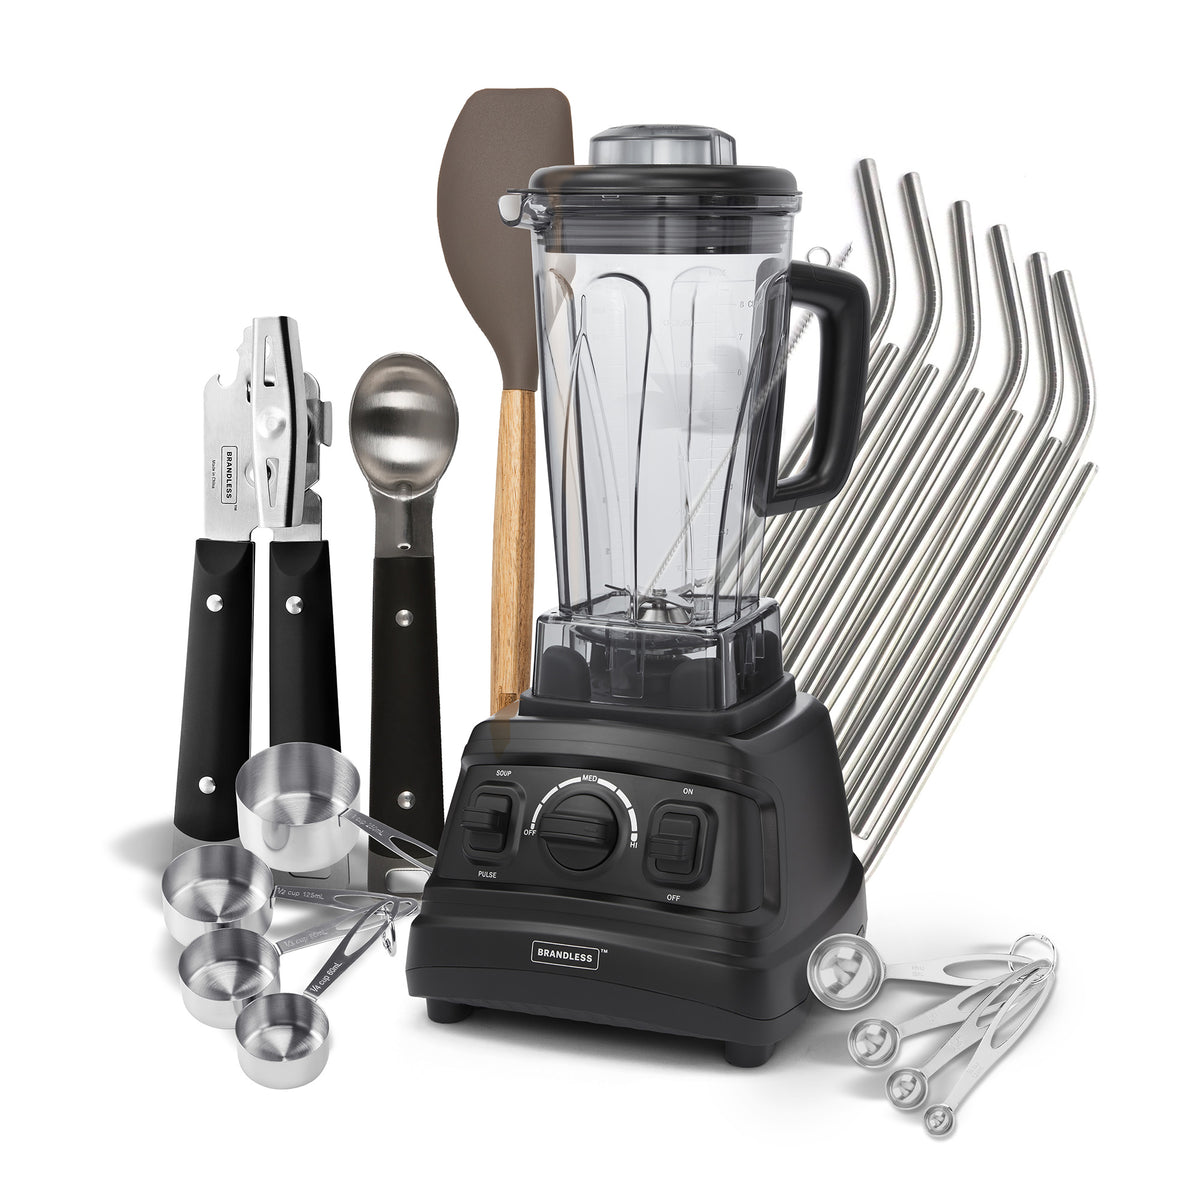 Bundle contents image, blender, straws, measuring cups and spoons, can opener, and ice cream scoop.